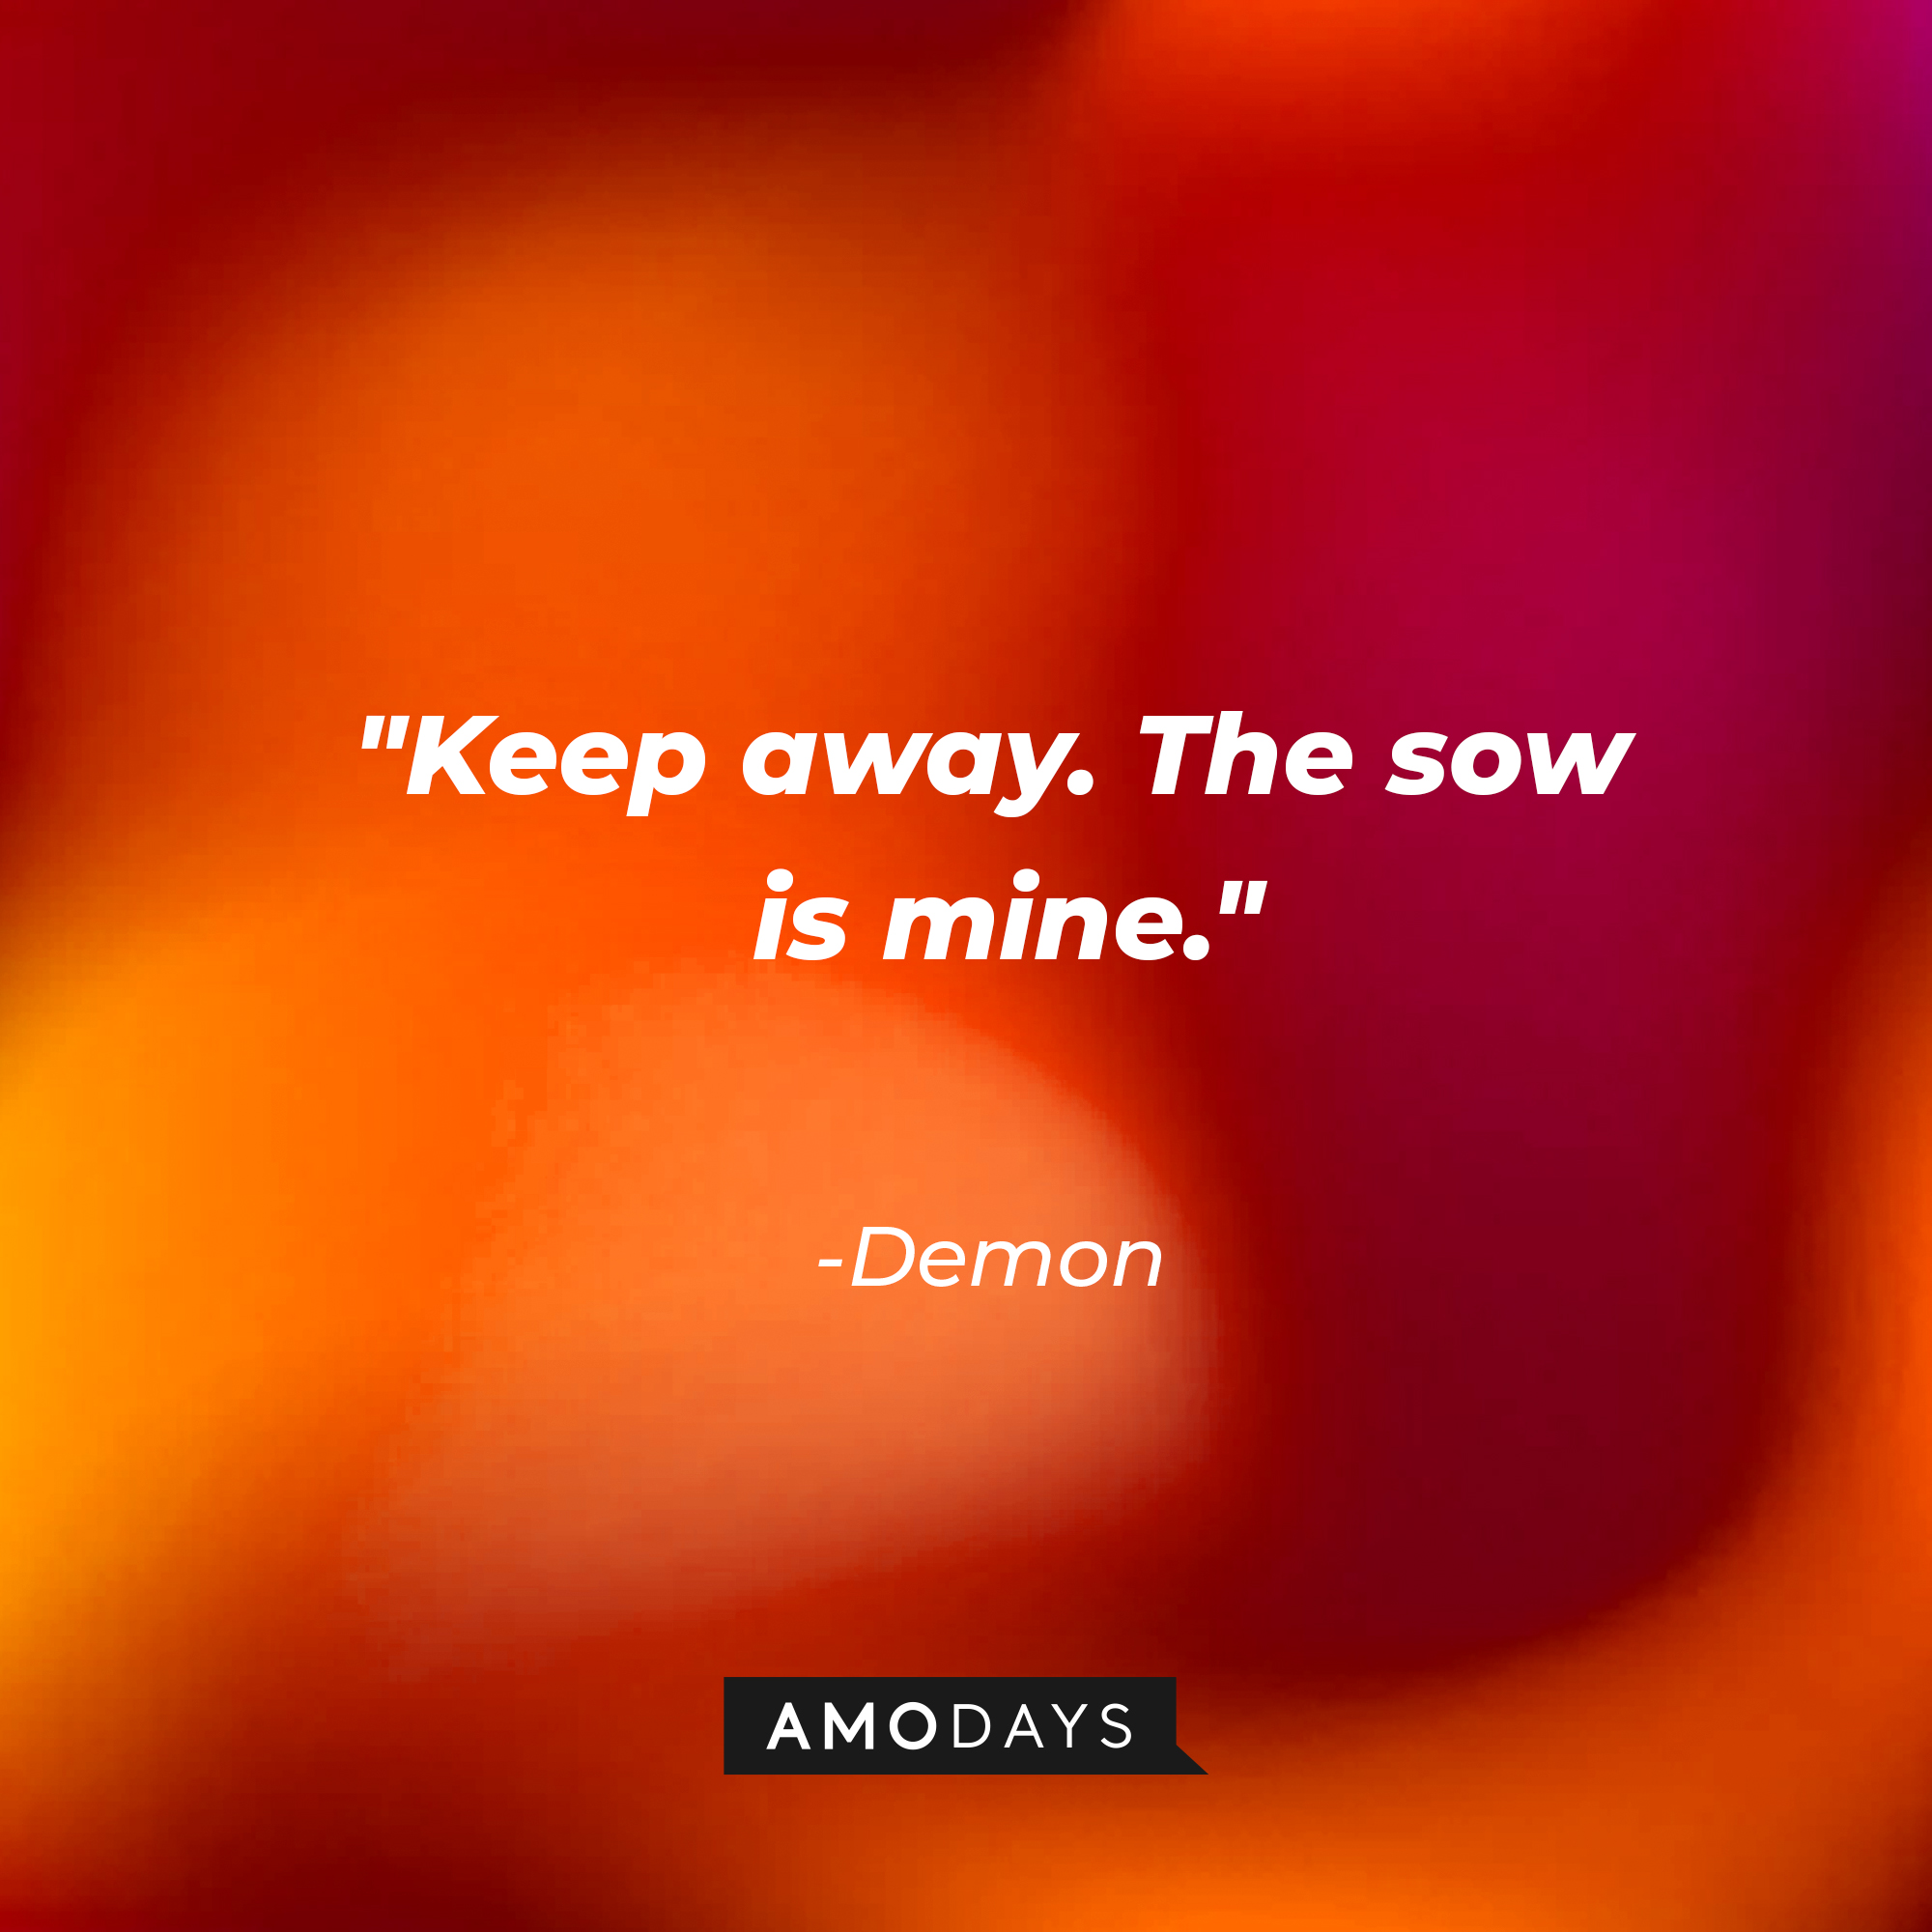 The Demon's quote: "Keep away. The sow is mine." | Source: AmoDAys